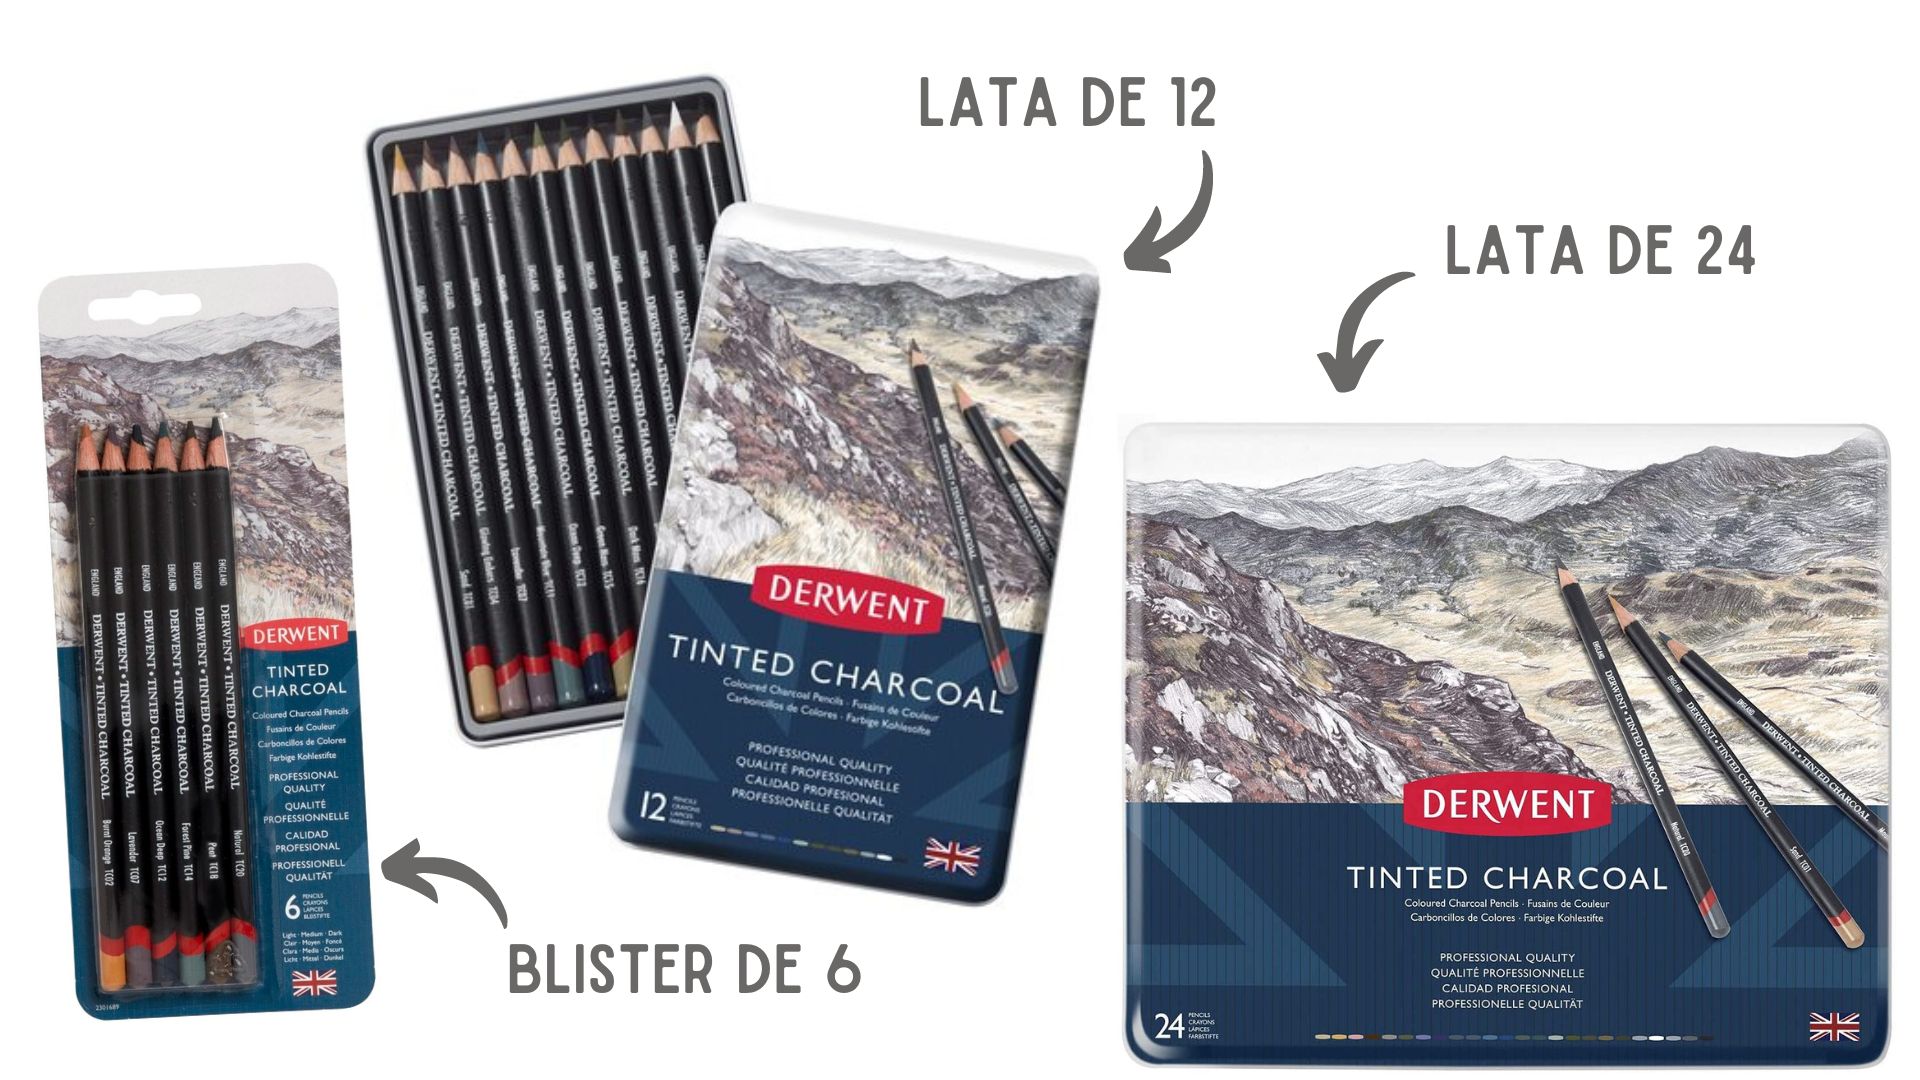 packaging nuevos lapices derwent drawing